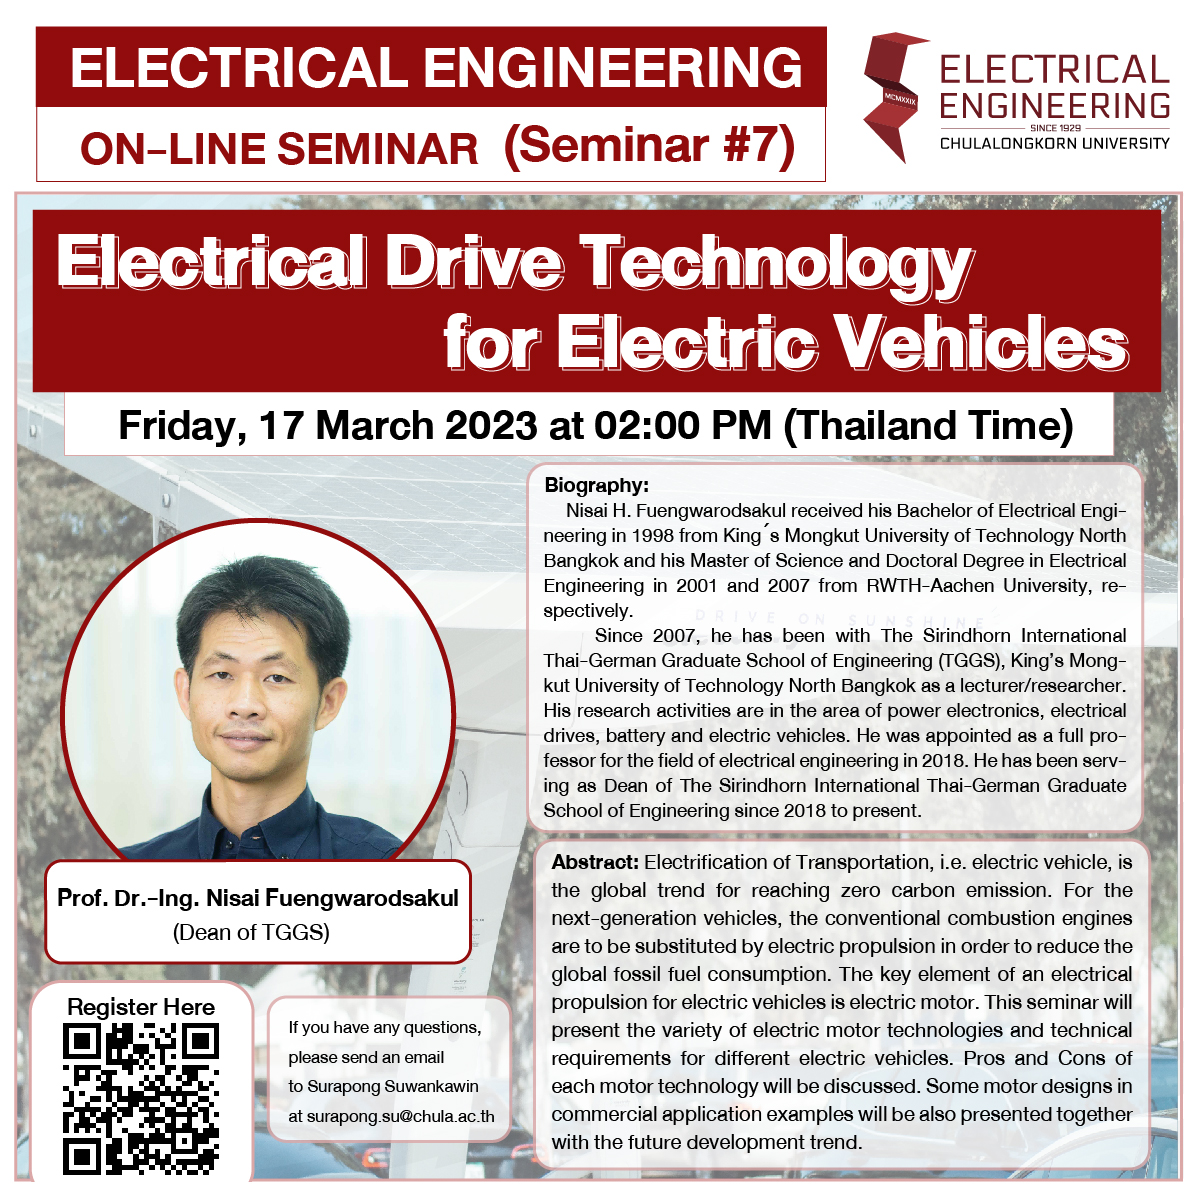 ELECTRICAL ENGNIEERING ON-LINE SEMINAR (Seminar #7) "Electrical Drive Technology for Electric Vehicles"